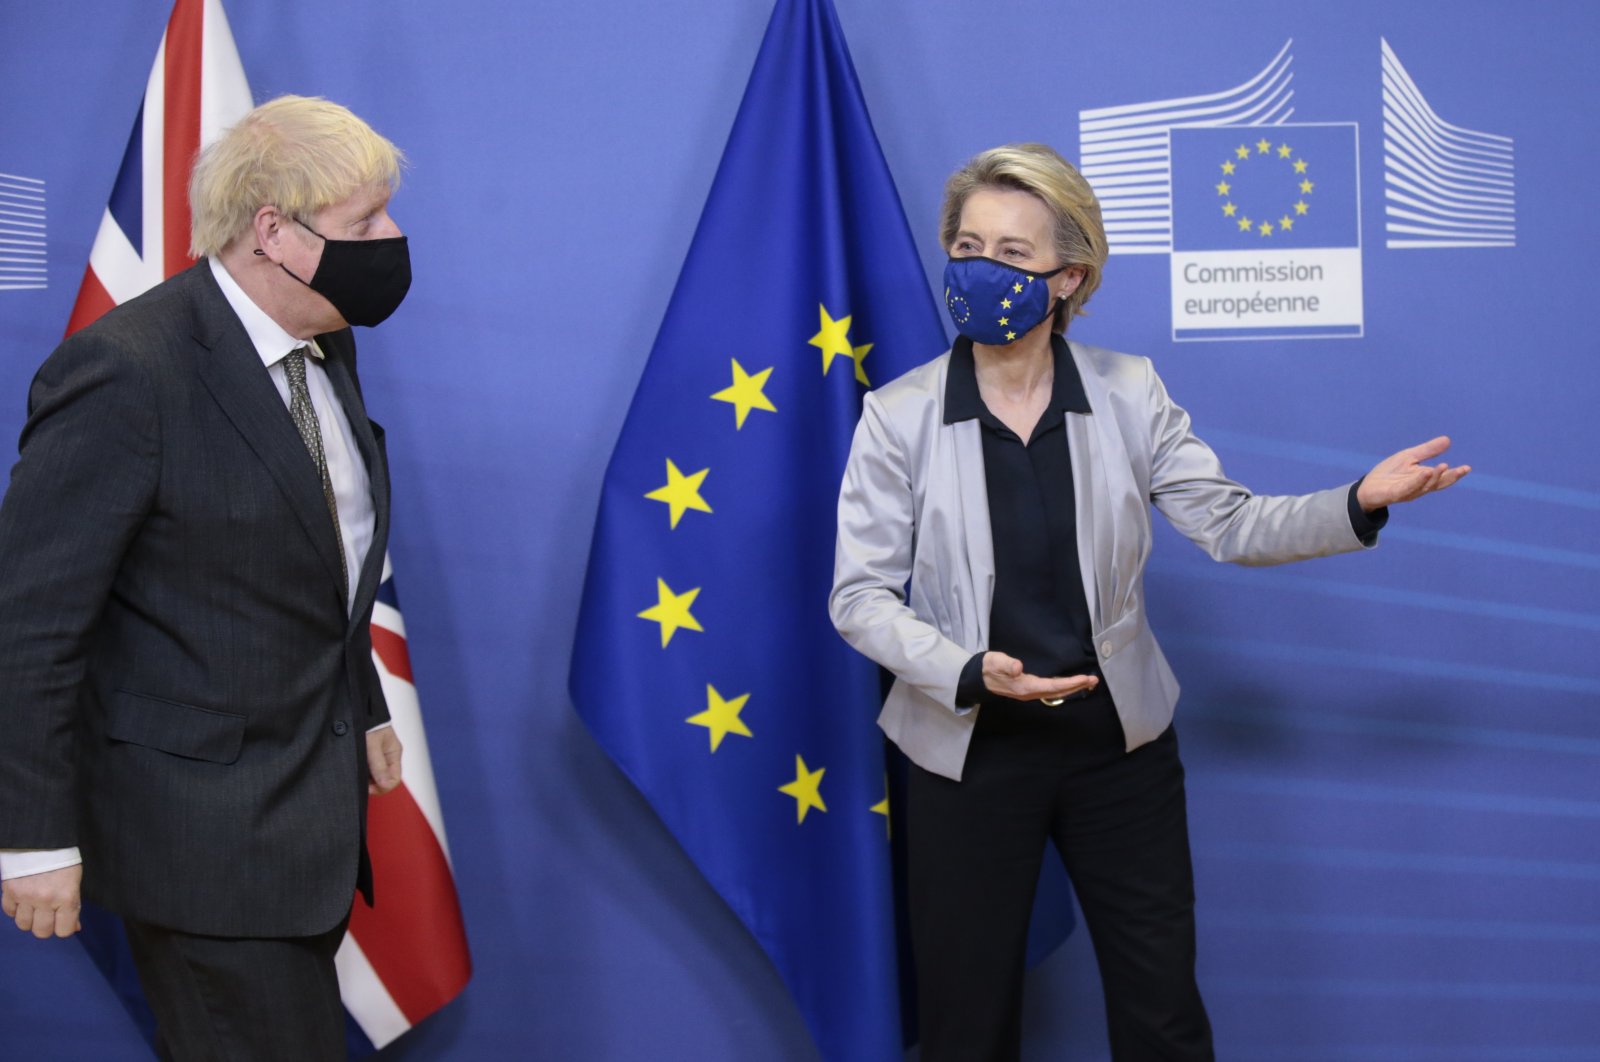 Britain's Prime Minister Boris Johnson (L) is welcomed by European Commission President Ursula von der Leyen (R) prior to post-Brexit trade deal talks, in Brussels, Belgium, 09 December 2020. (EPA Photo)